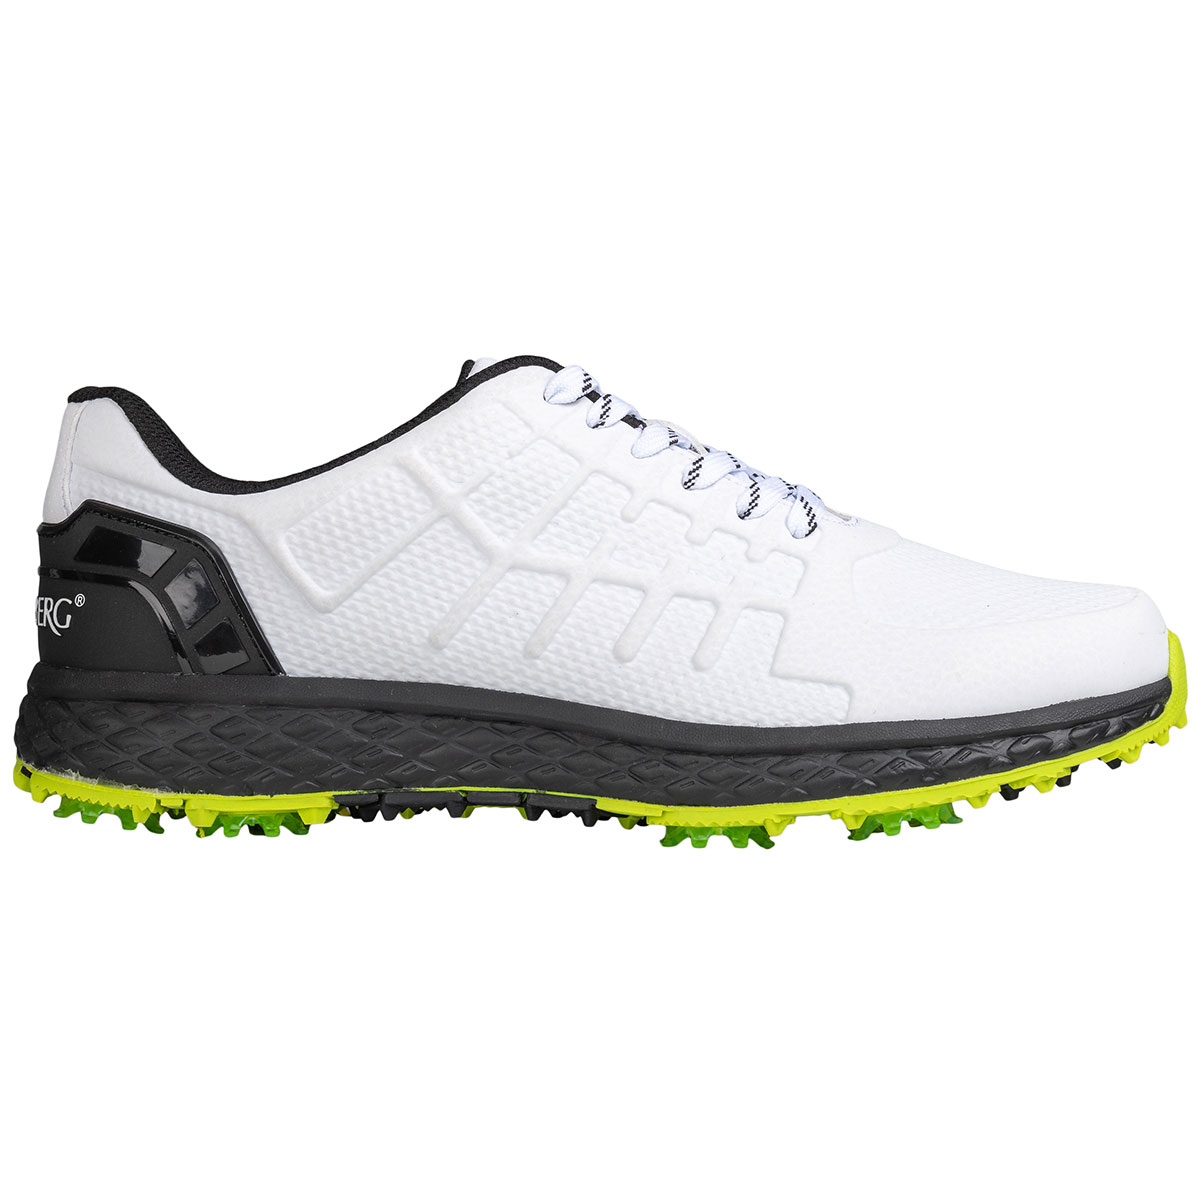 Stromberg Blade Shoes from american golf